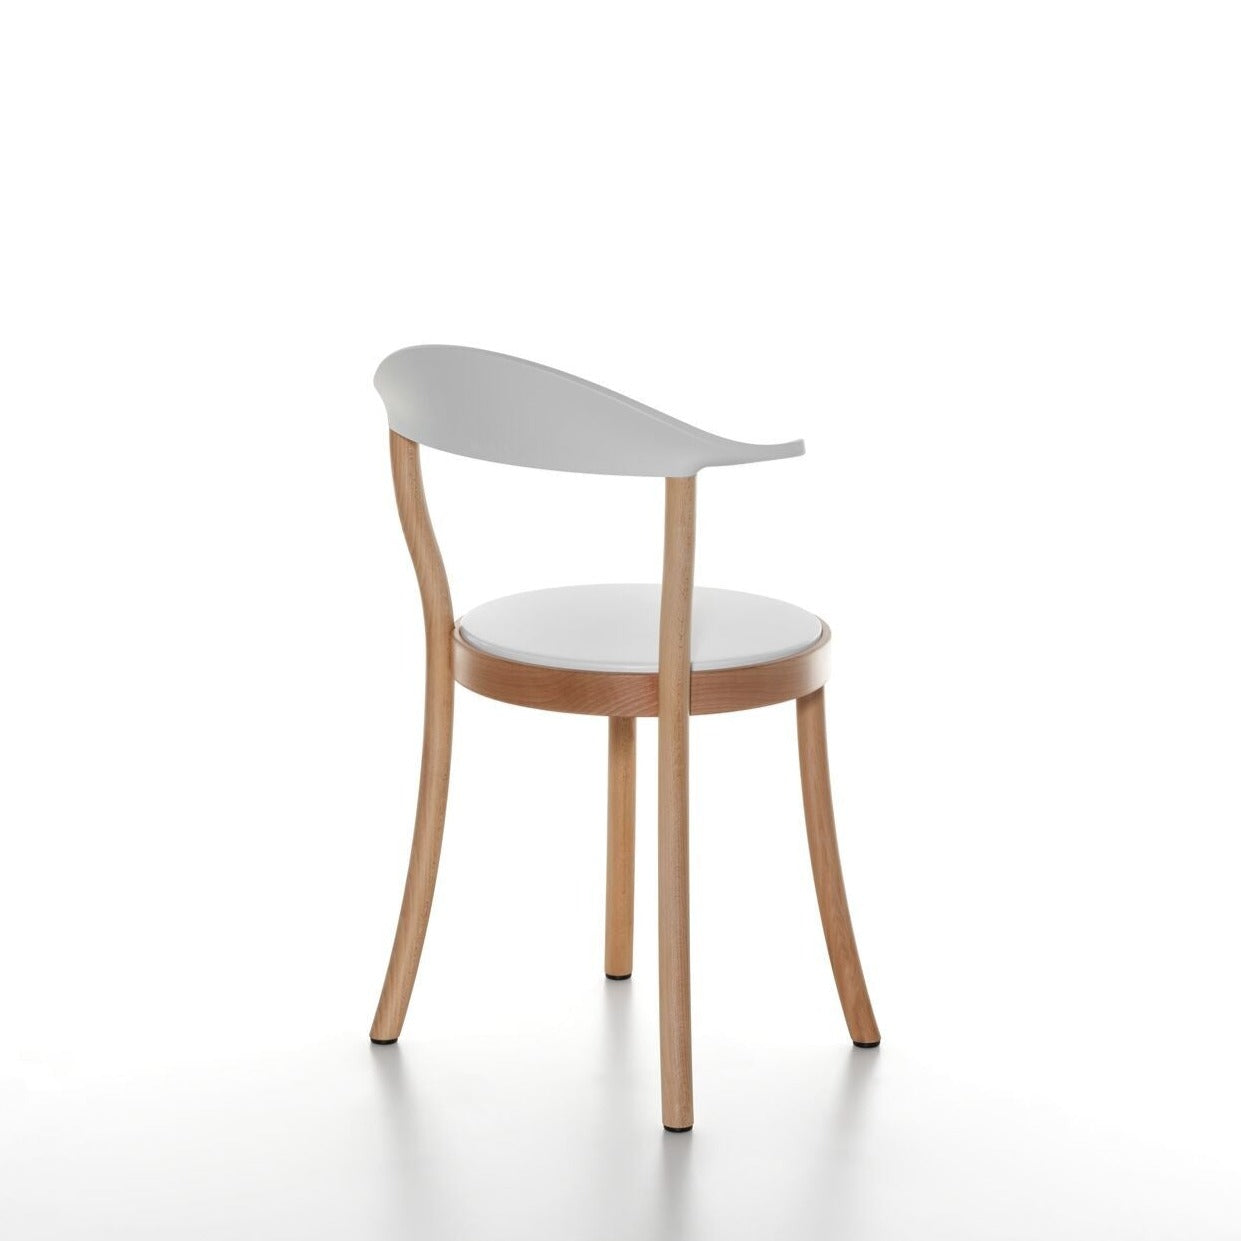 MONZA BISTRO Chair beech wood frame-natural-white seat and backrest